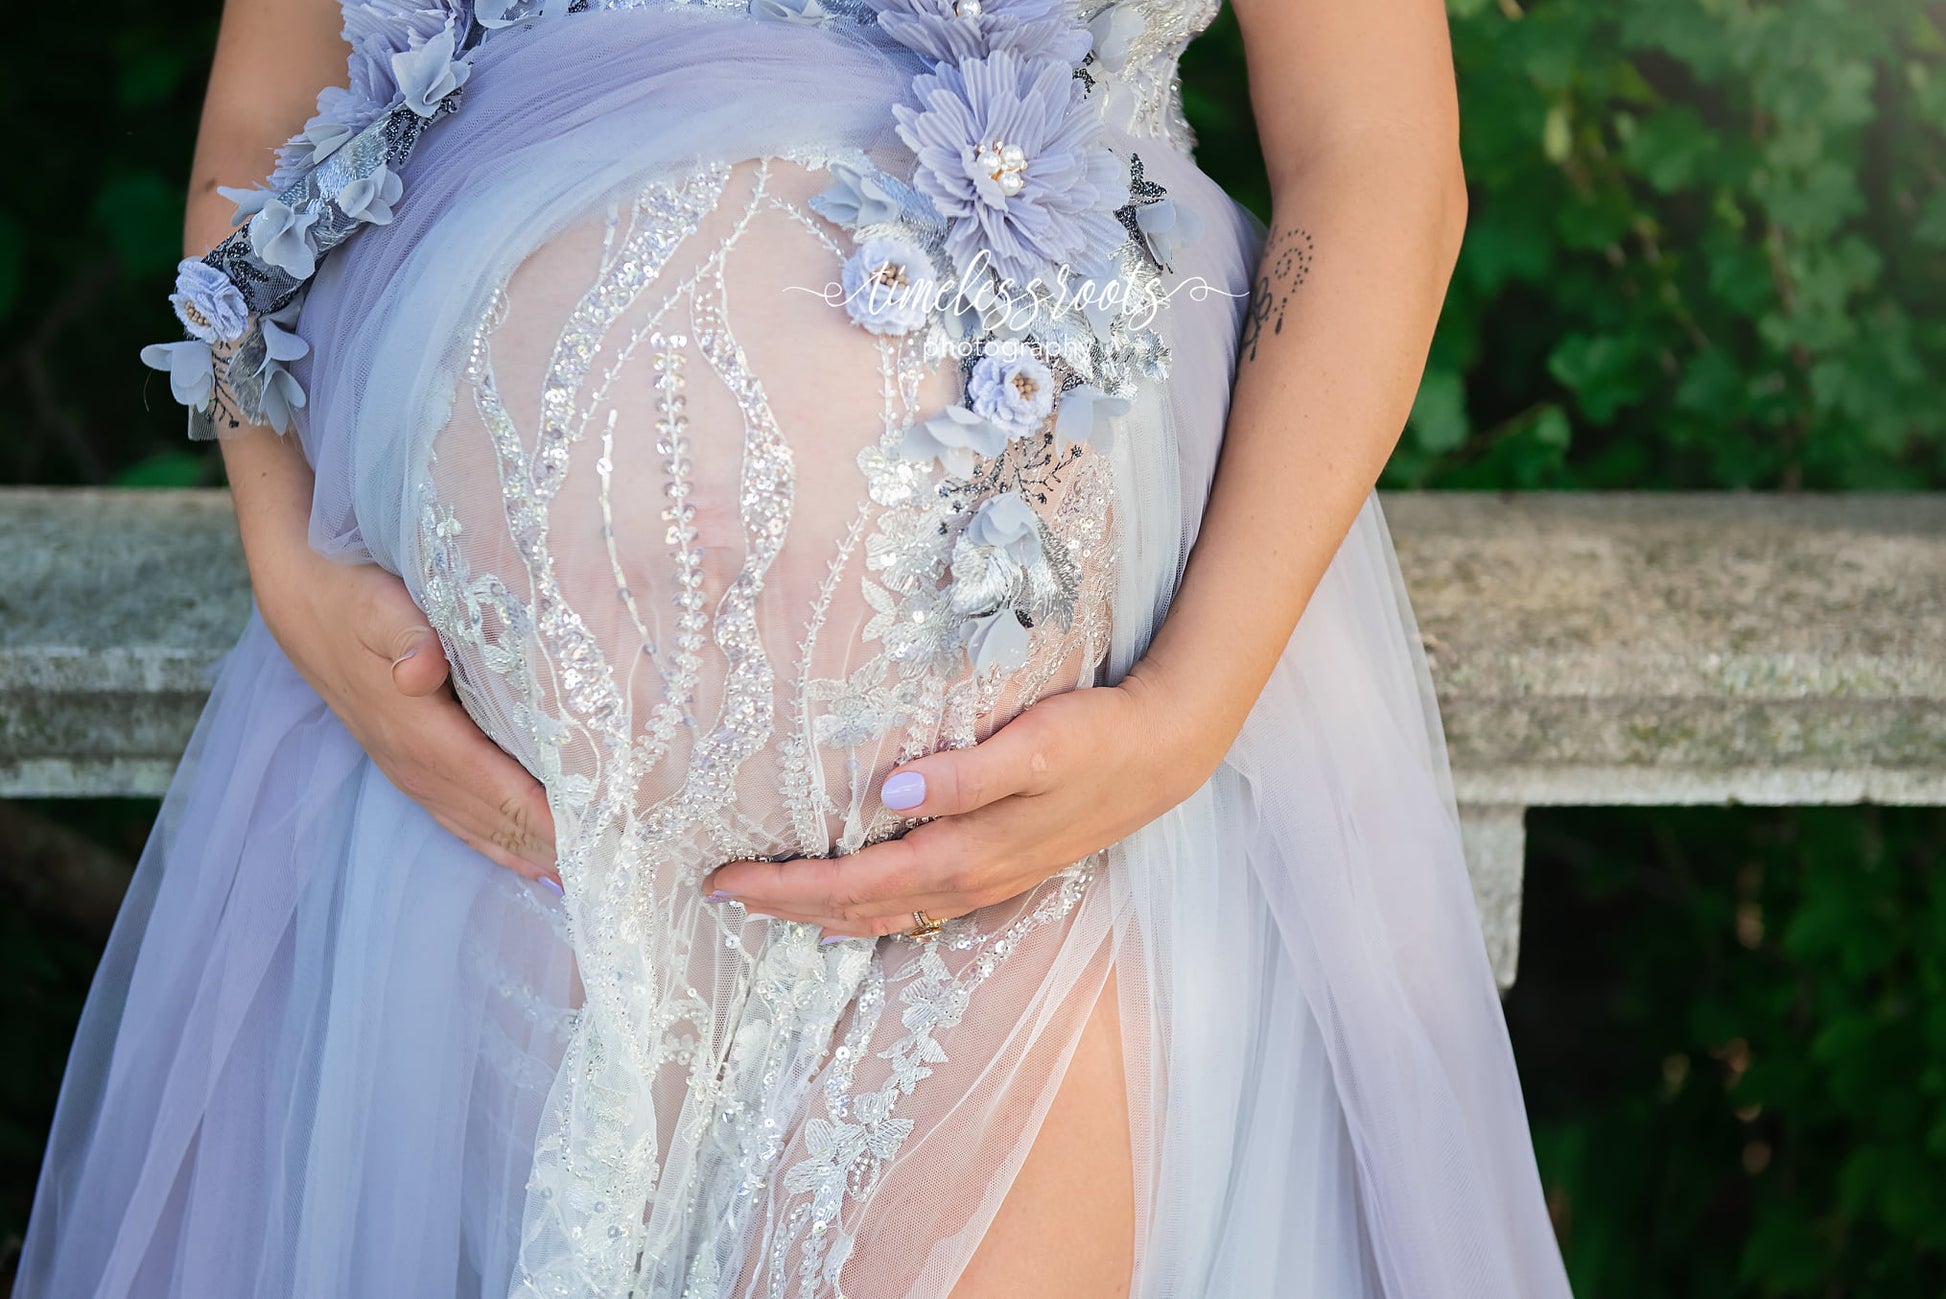 Gray / Lilac Run Away With Me Gown - maternity photoshoot dress